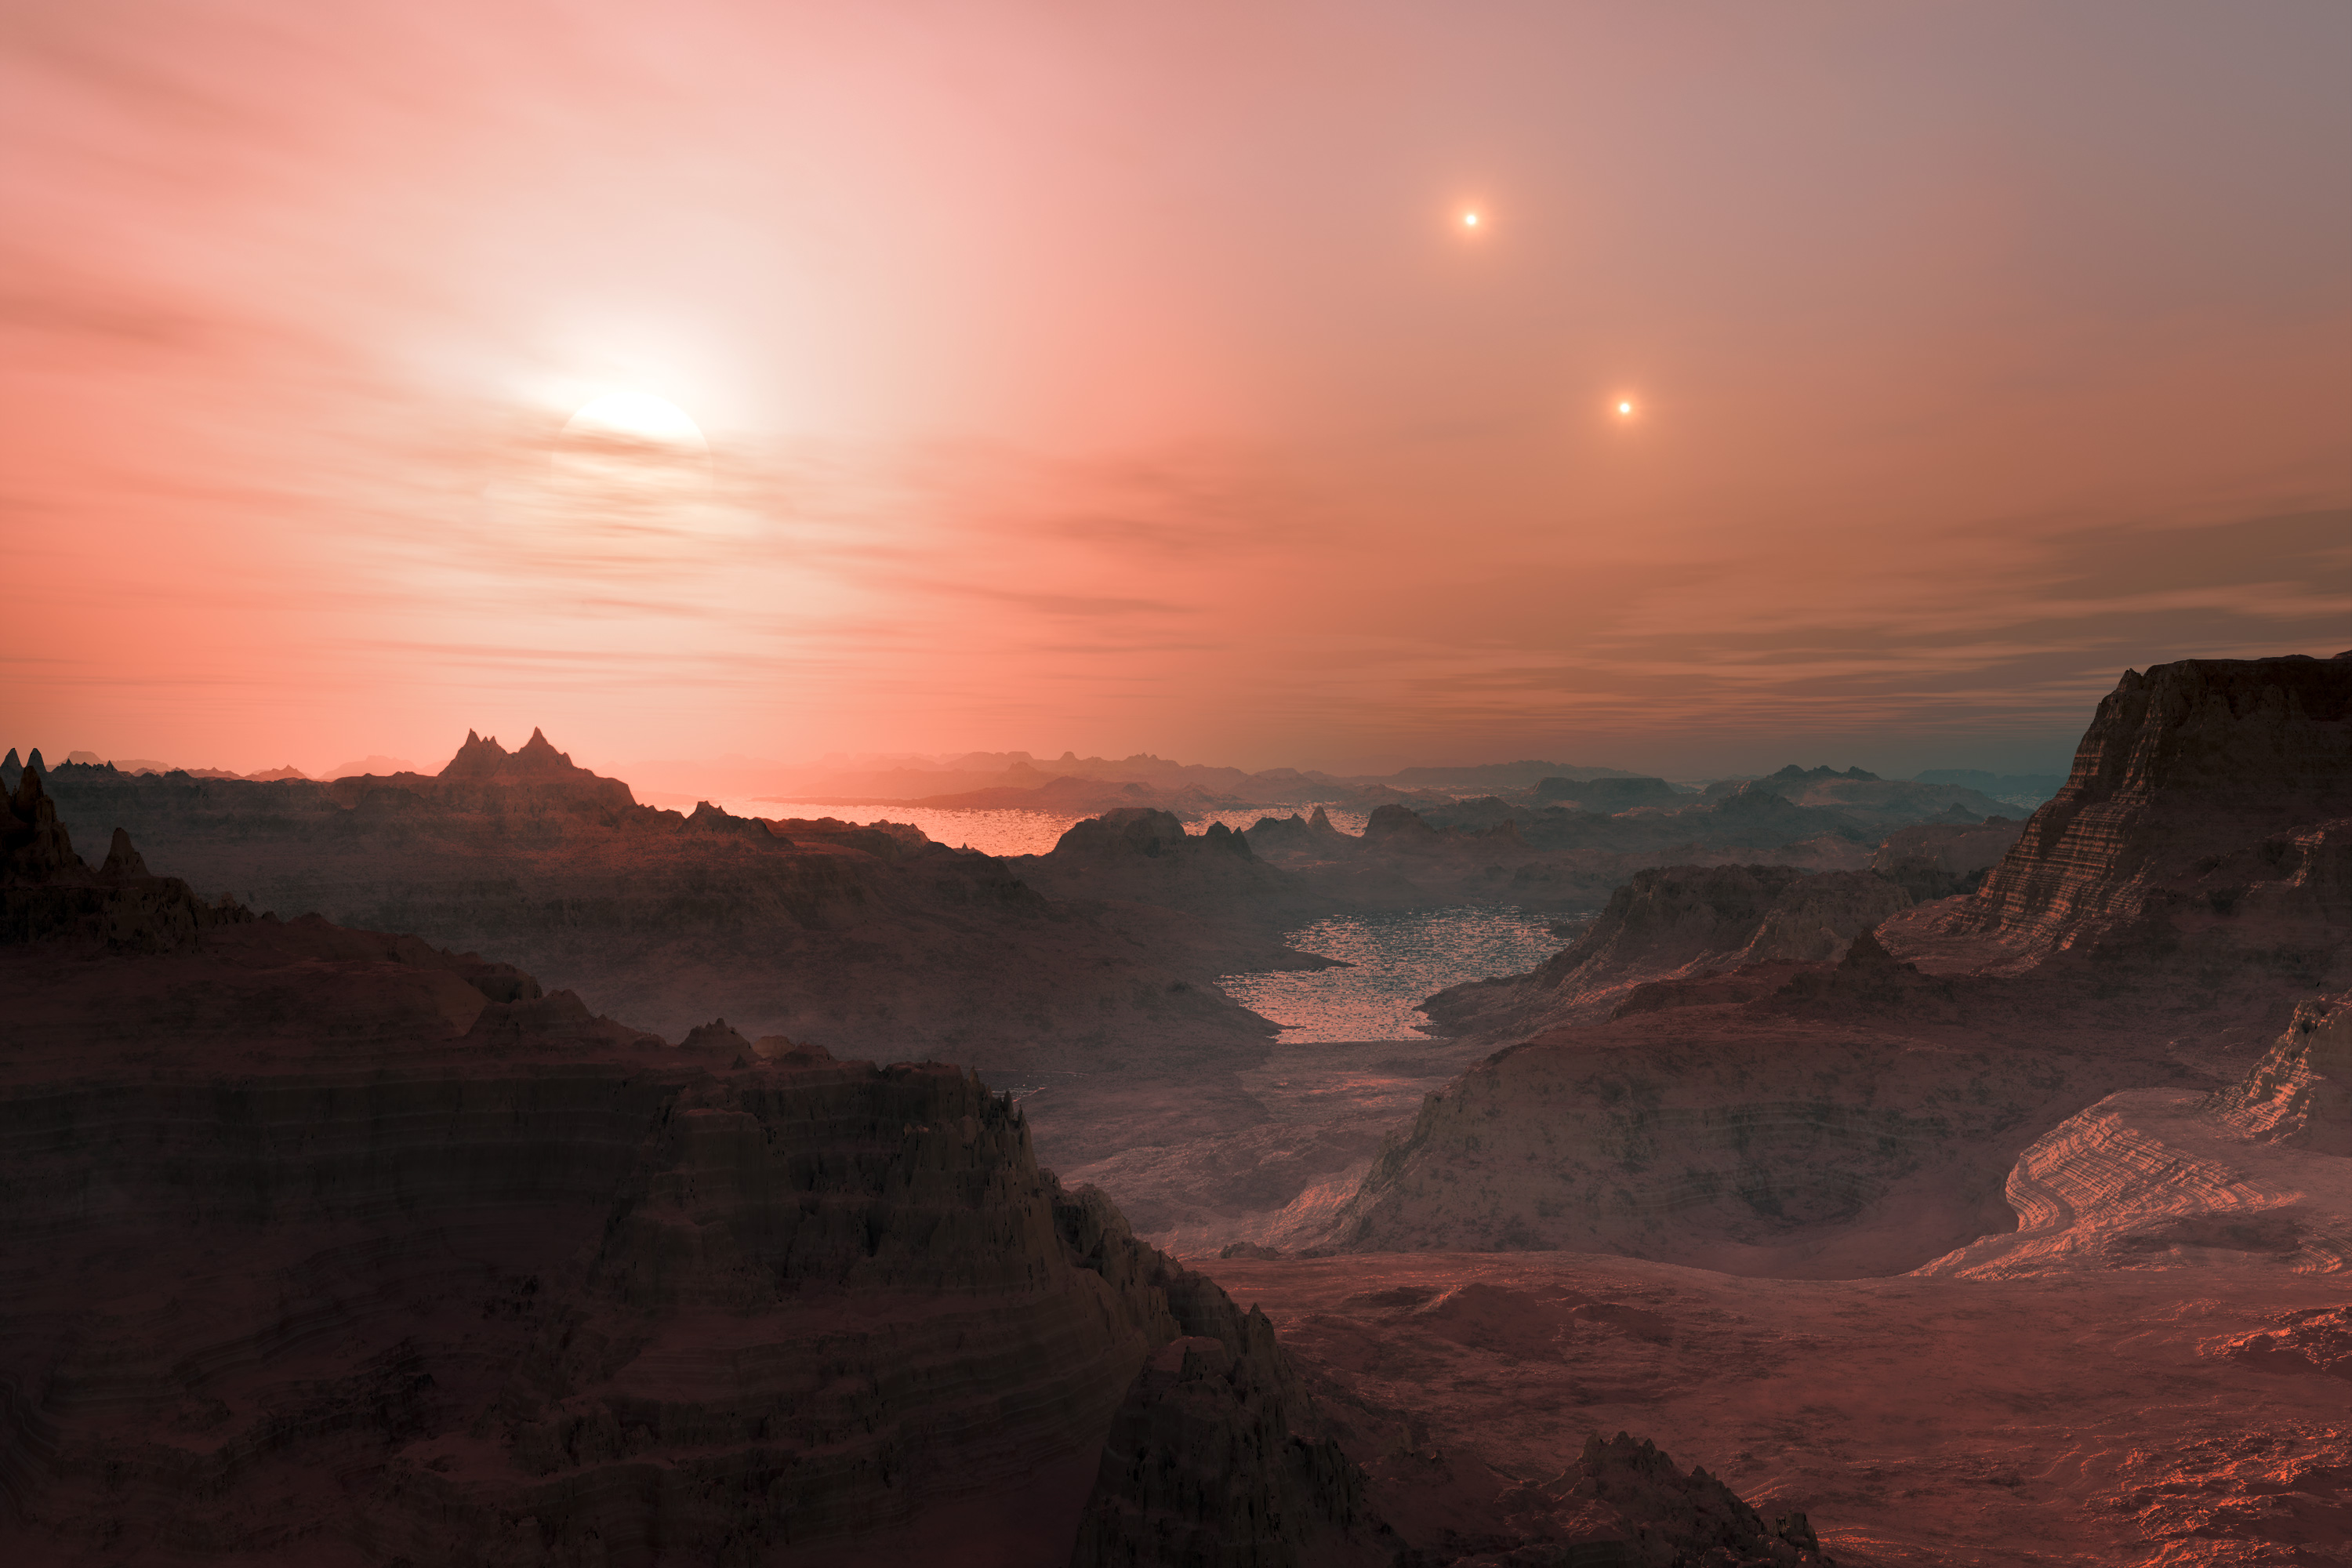 This artist’s impression shows a sunset seen from the super-Earth Gliese 667 Cc. The brightest star in the sky is the red dwarf Gliese 667 C, which is part of a triple star system. The other two more distant stars, Gliese 667 A and B appear in the sky also to the right. Astronomers have estimated that there are tens of billions of such rocky worlds orbiting faint red dwarf stars in the Milky Way alone.